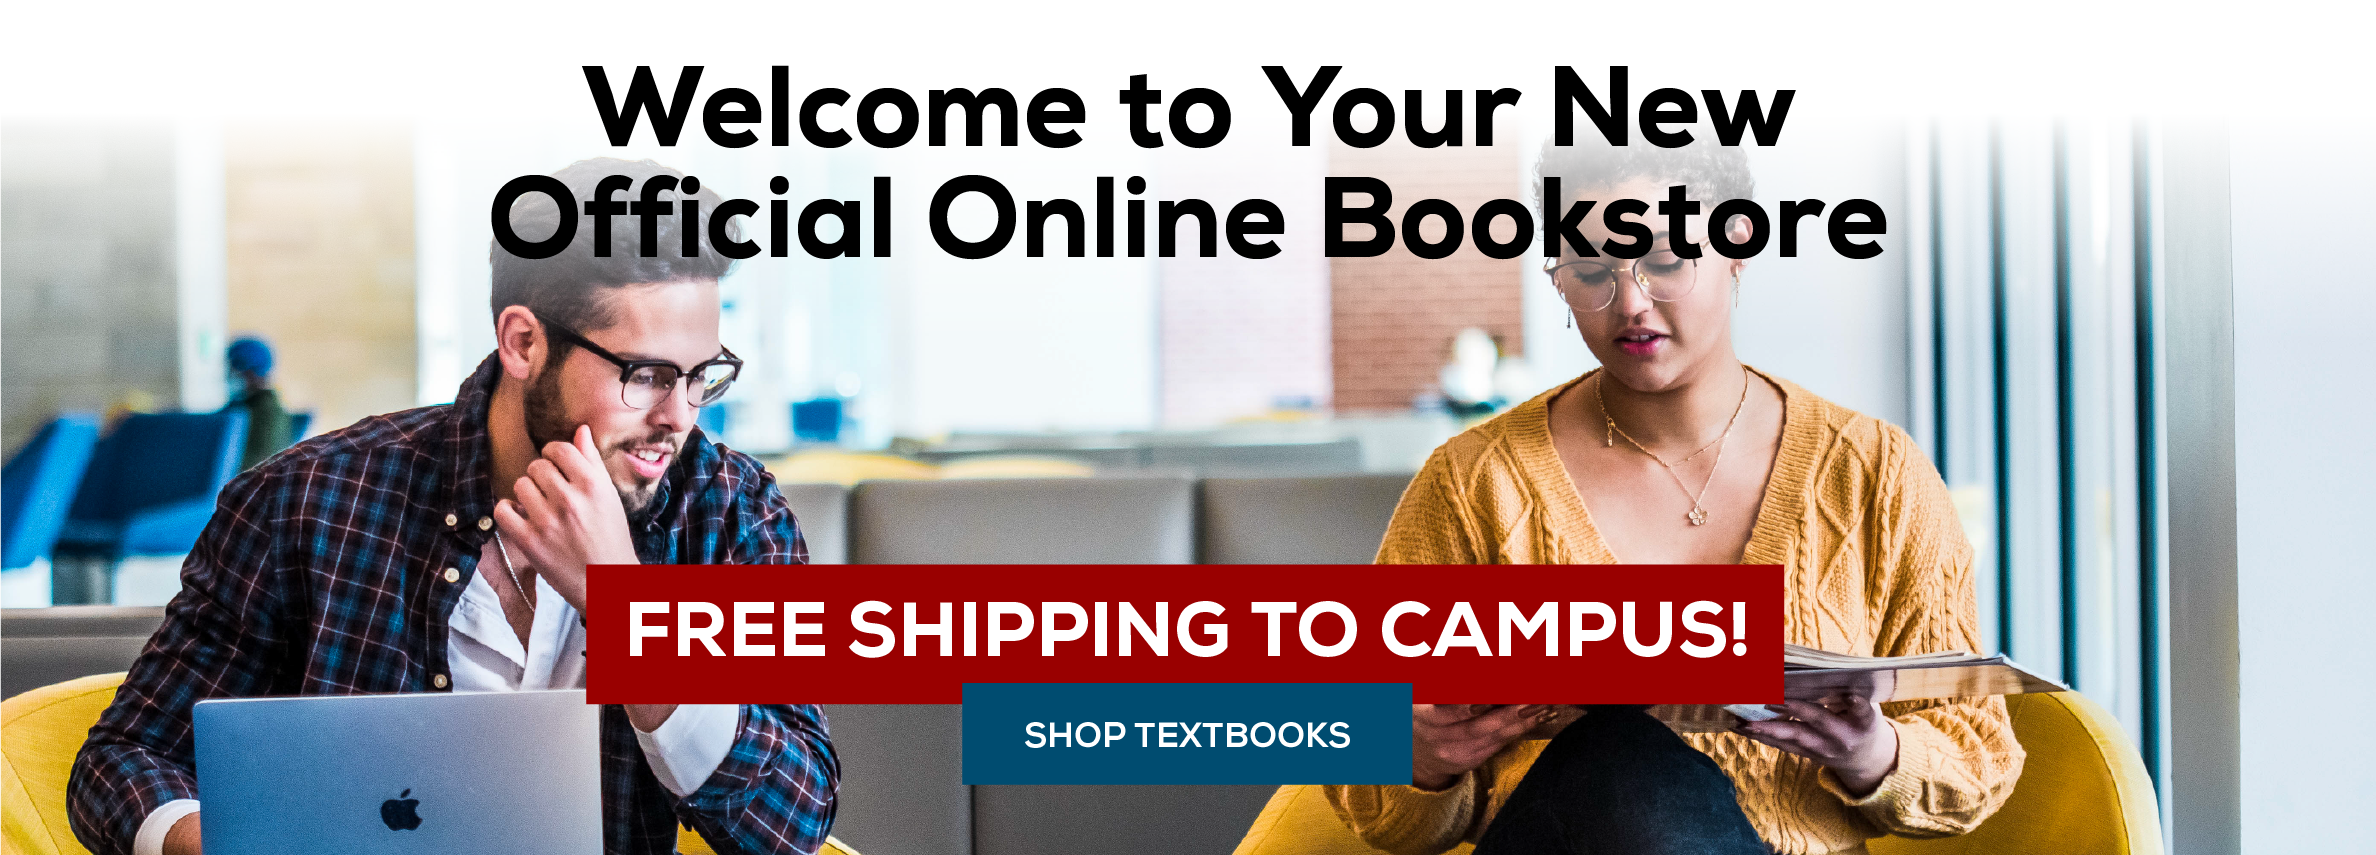 Welcome to Your Official Online Bookstore Free Shipping to Campus